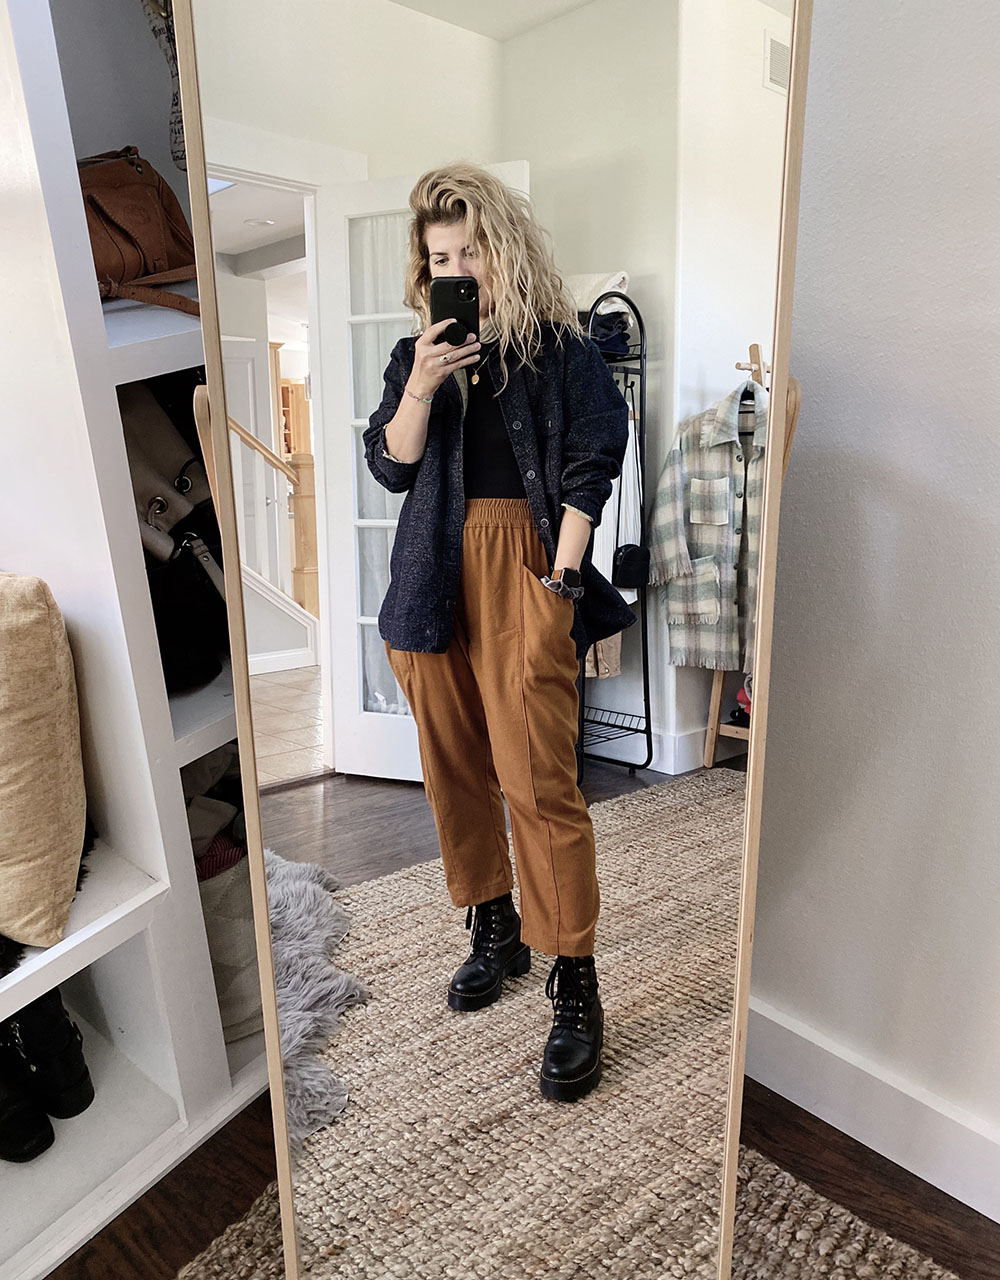 A white woman with blonde wavy hair is wearing a navy blue shirt unbuttoned over a black top and rust colored pants. She is also wearing black combat boots.